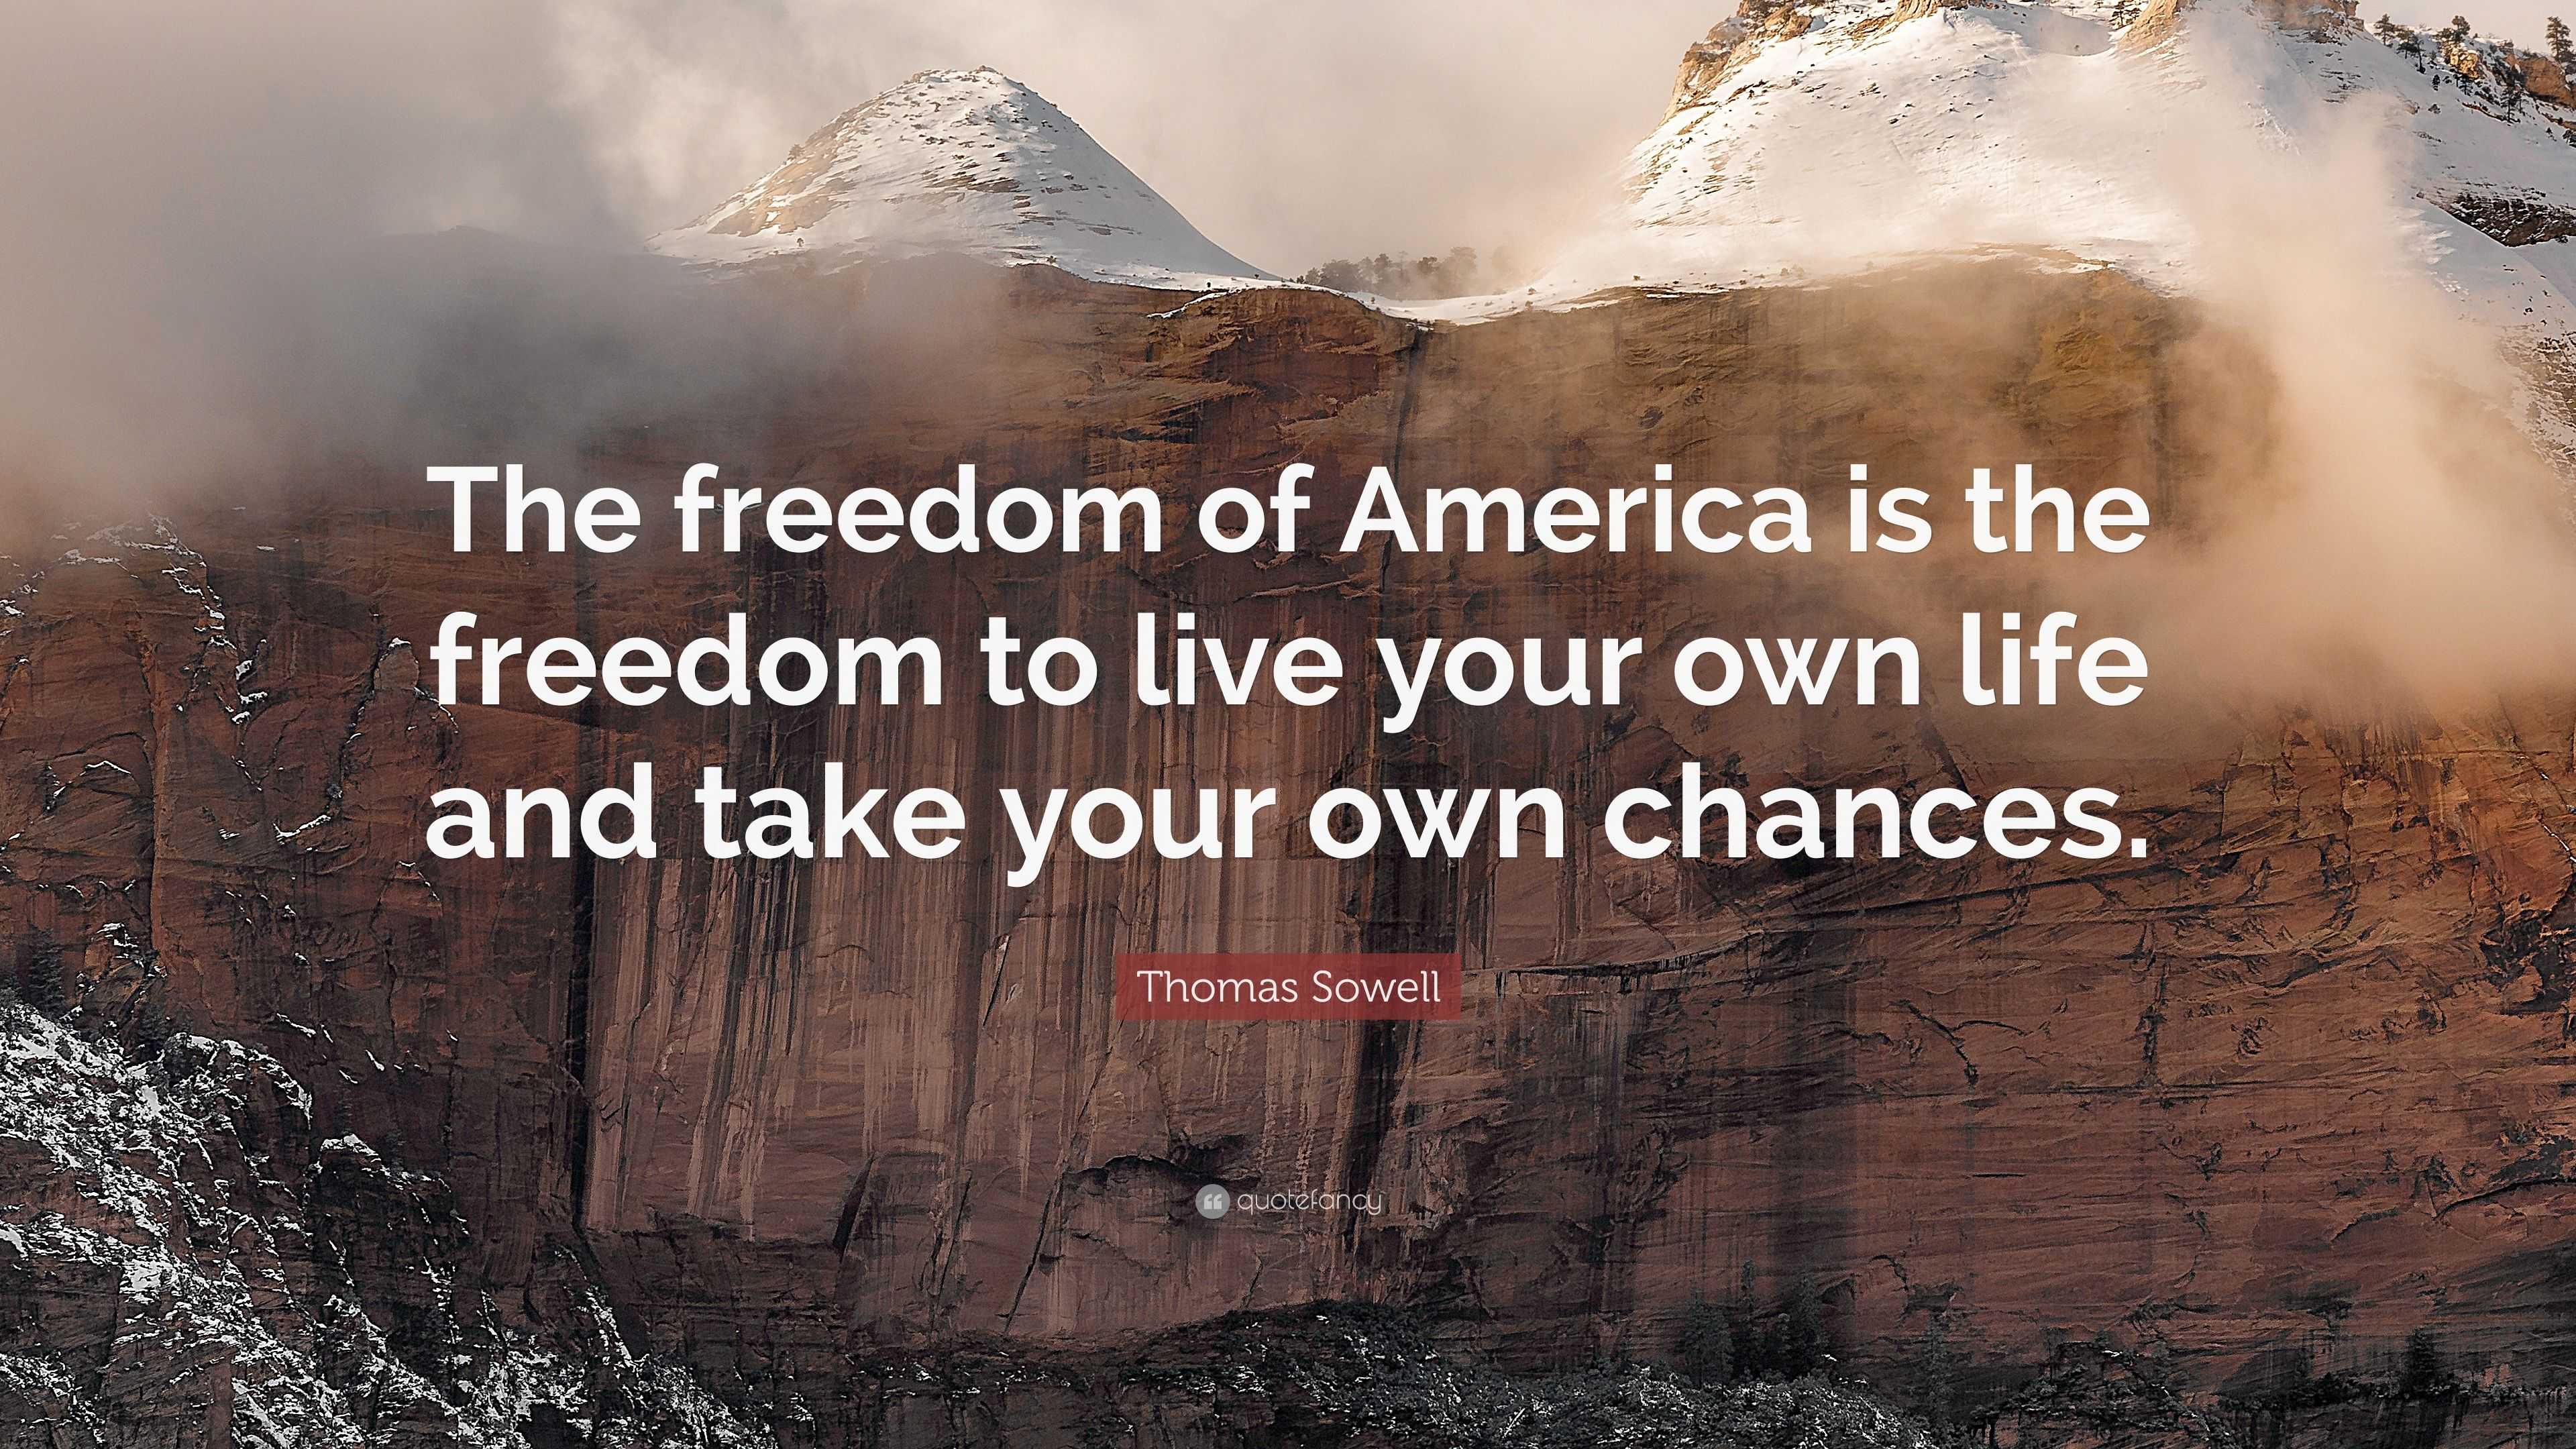 Thomas Sowell Quote: “The freedom of America is the freedom to live